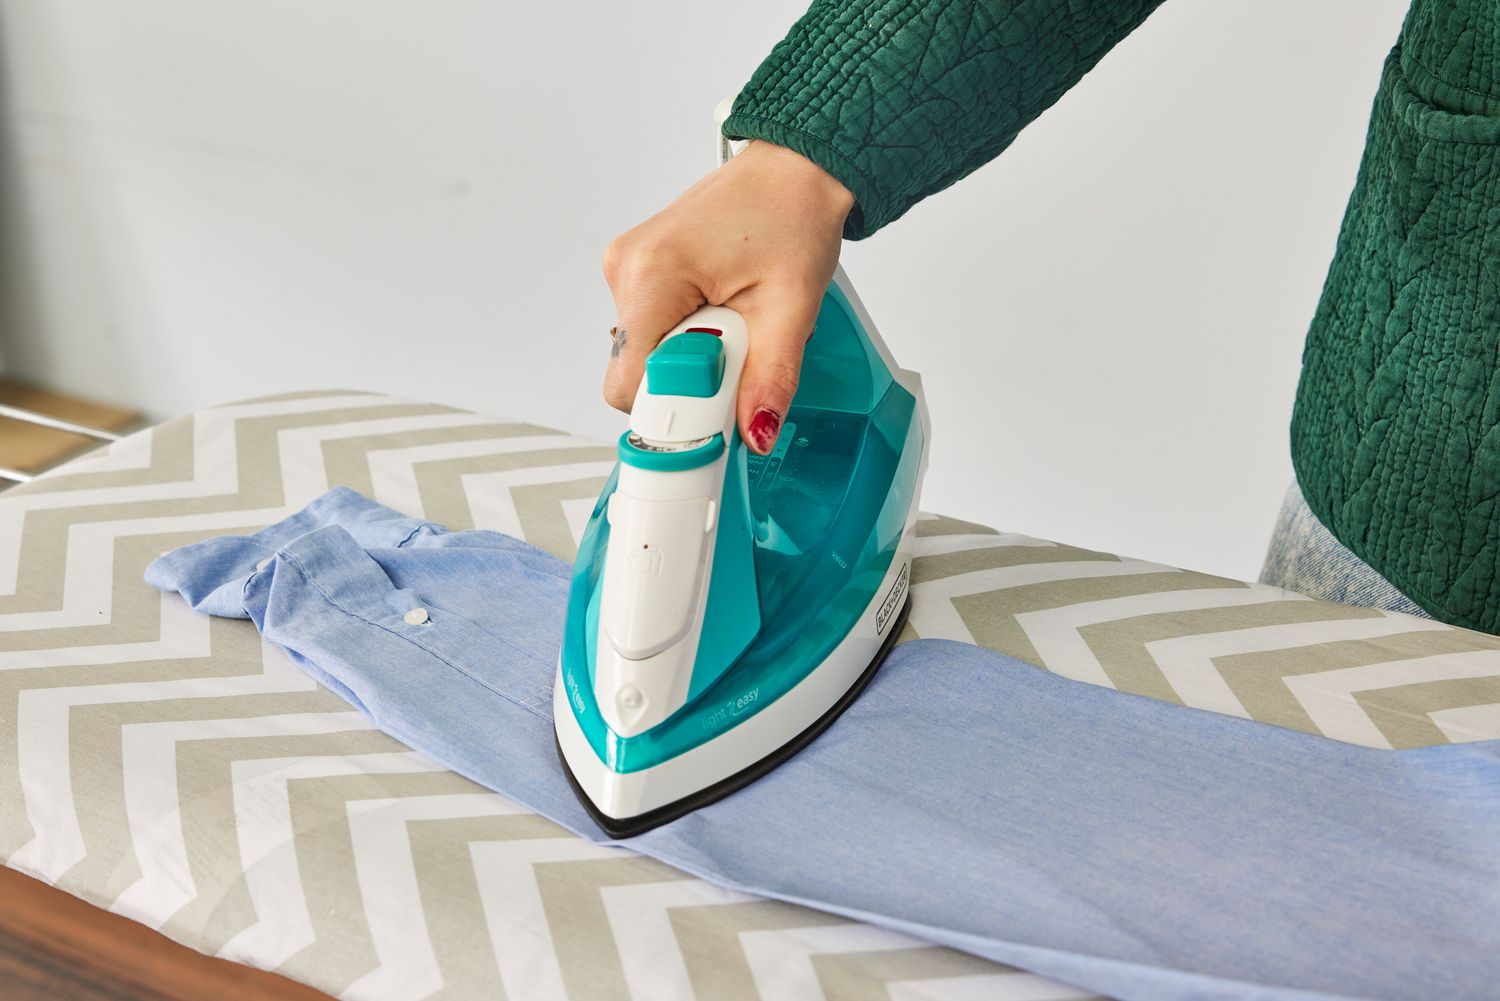 A close-up of a hand pressing an iron into clothes on the Amazon Basics Full-Size Ironing Board 